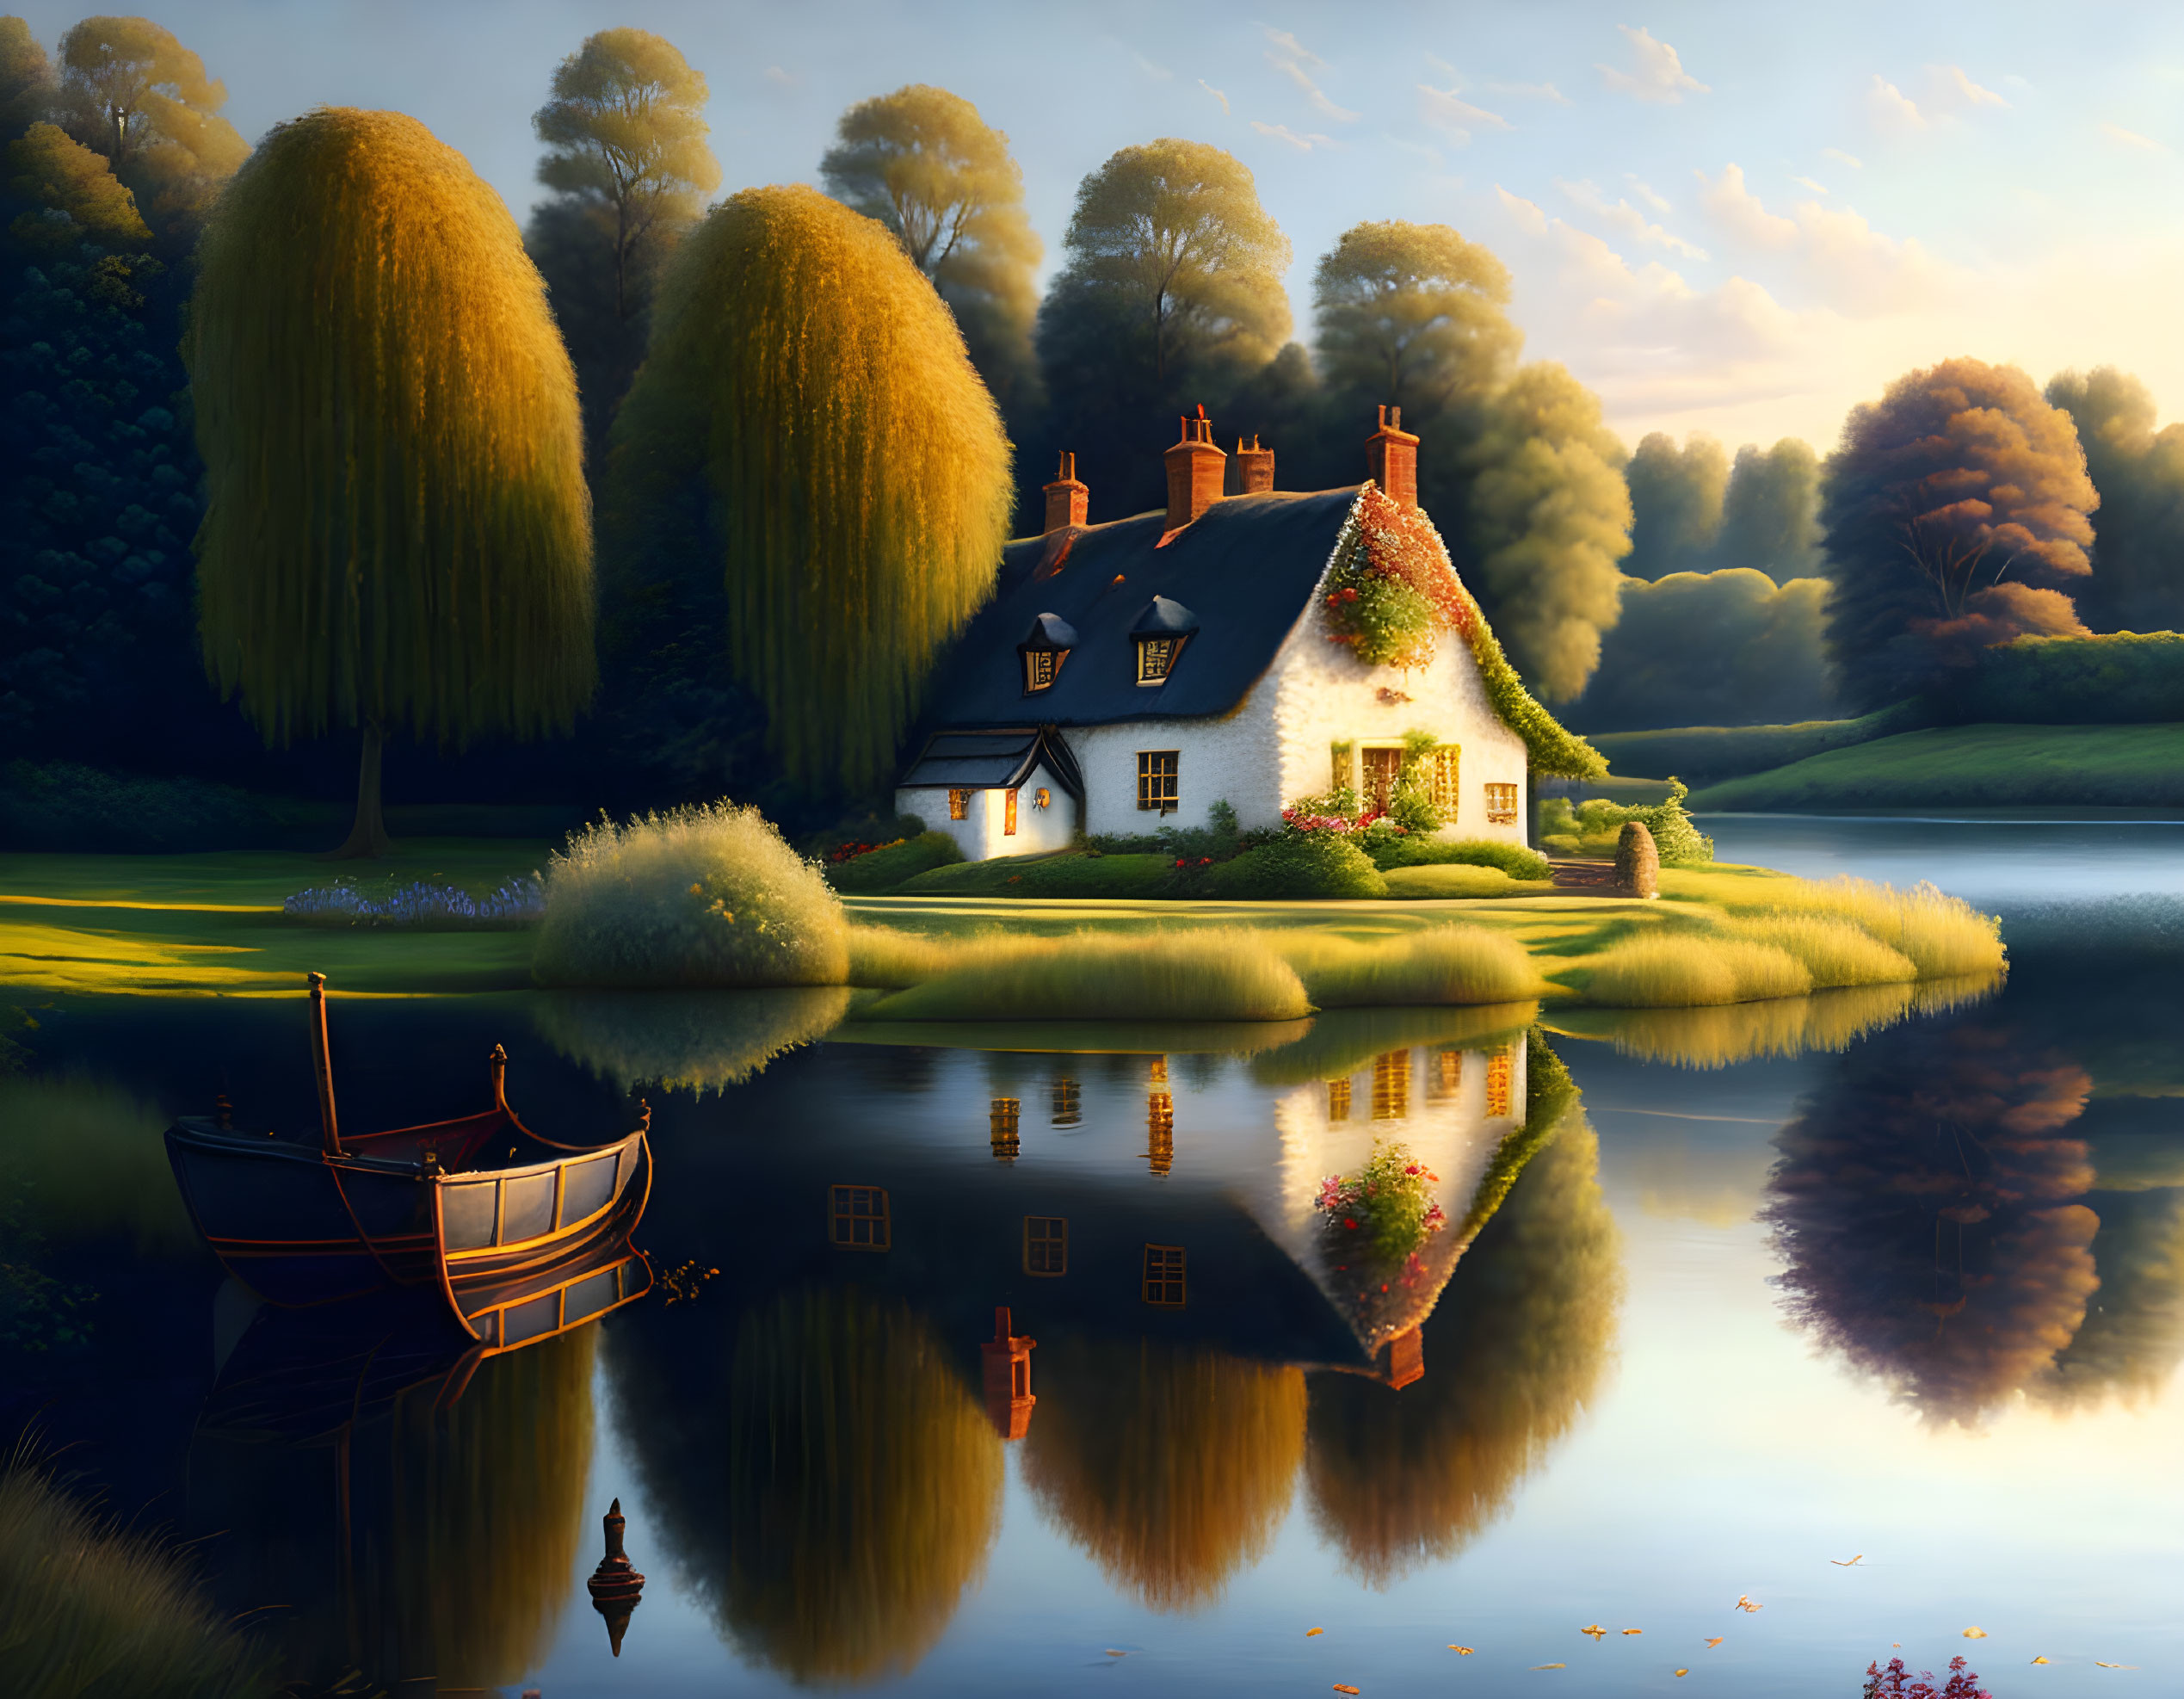 Tranquil Thatched Cottage by Calm Lake and Trees